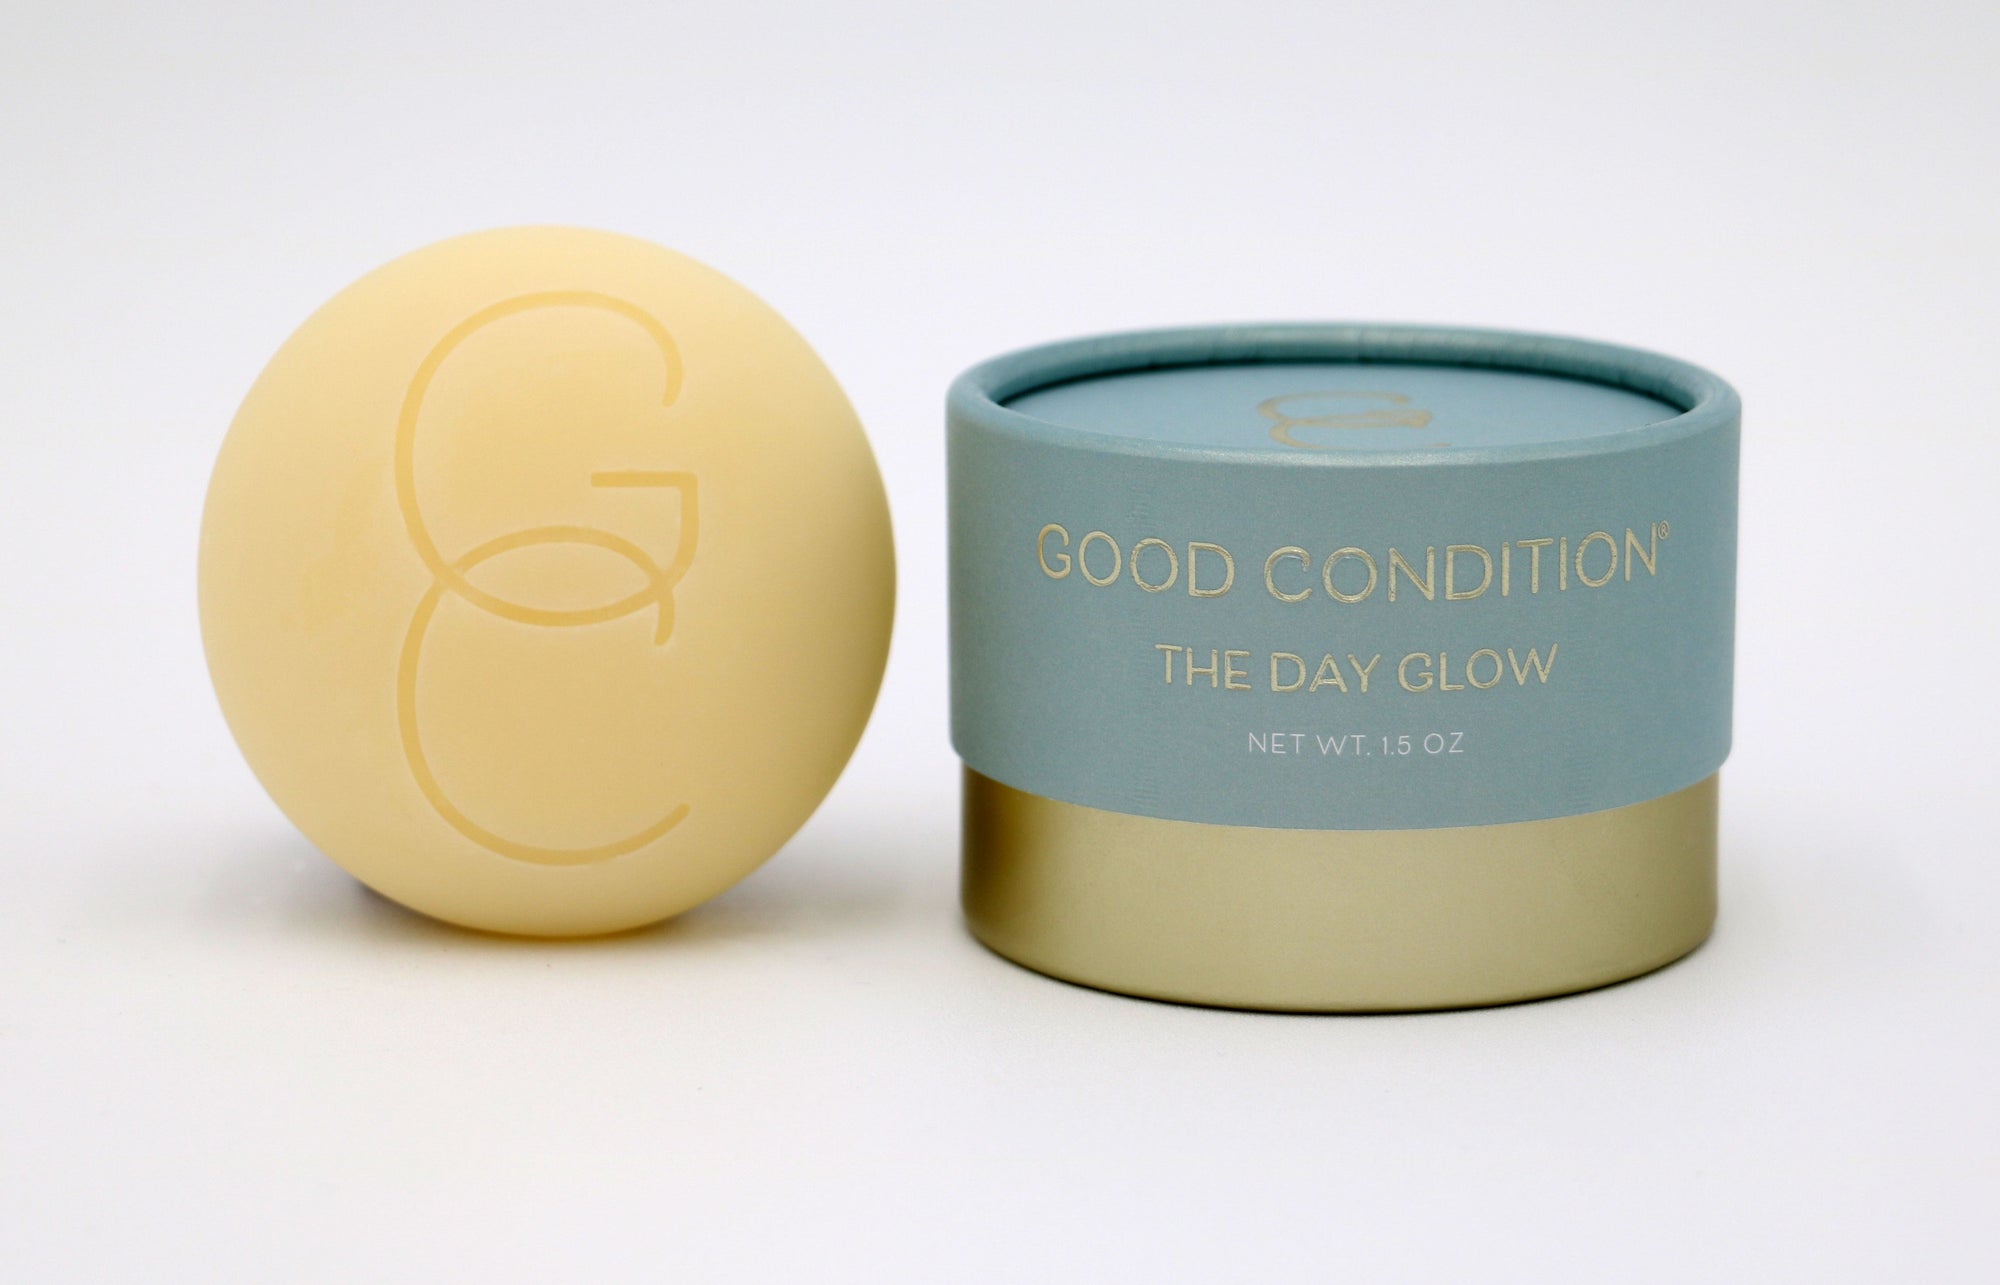 Good Condition The Day Glow premium kokum butter based daily facial moisturizer, made with vitamin e to fight free radical damage, passionfruit seed oil to combat the signs of aging, kalahari melon seed oil to reduce inflammation, caprylic/capric triglycerides and squalane to smooth and soften the skin.